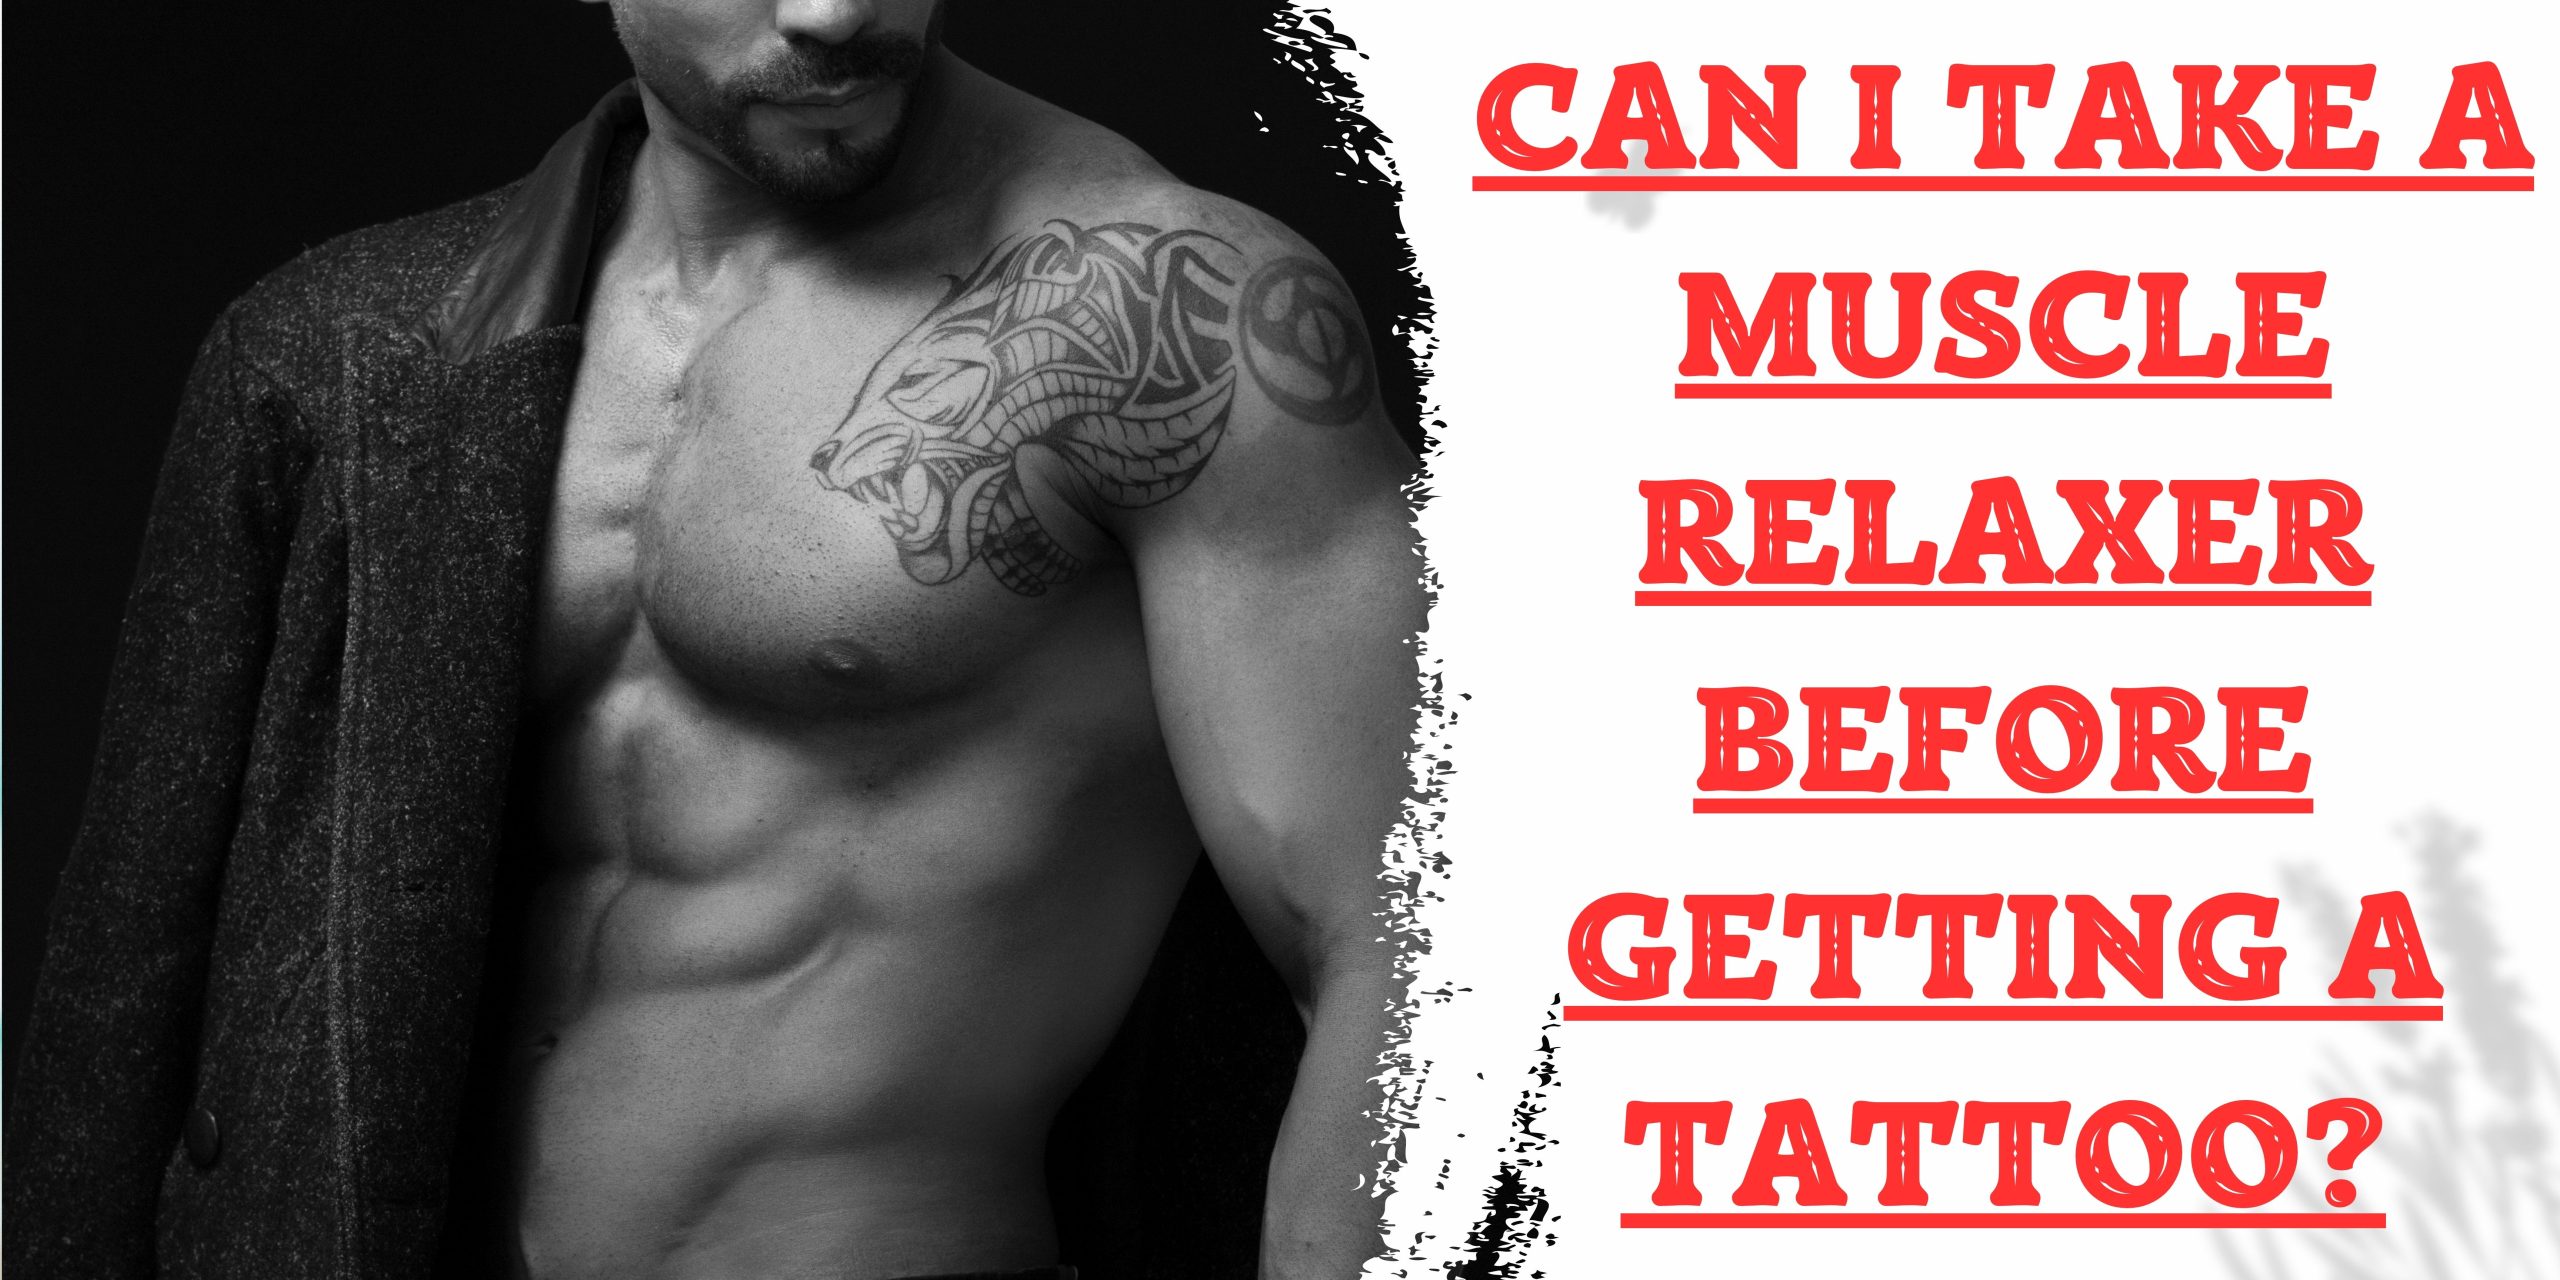 Can I Take A Muscle Relaxer Before Getting A Tattoo?